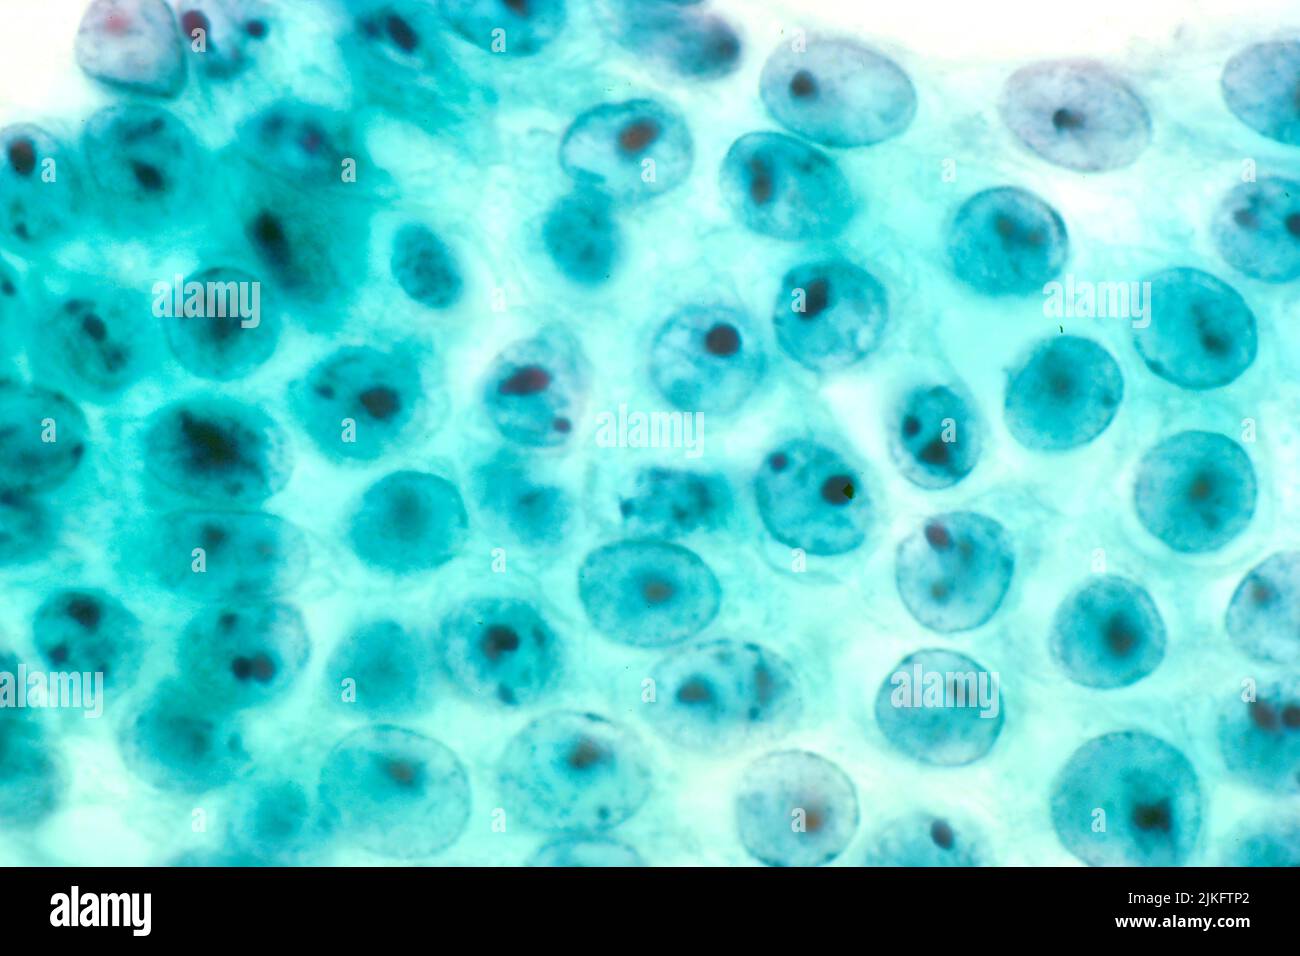 Reactive human stomach cells, which are not malignant. Stock Photo